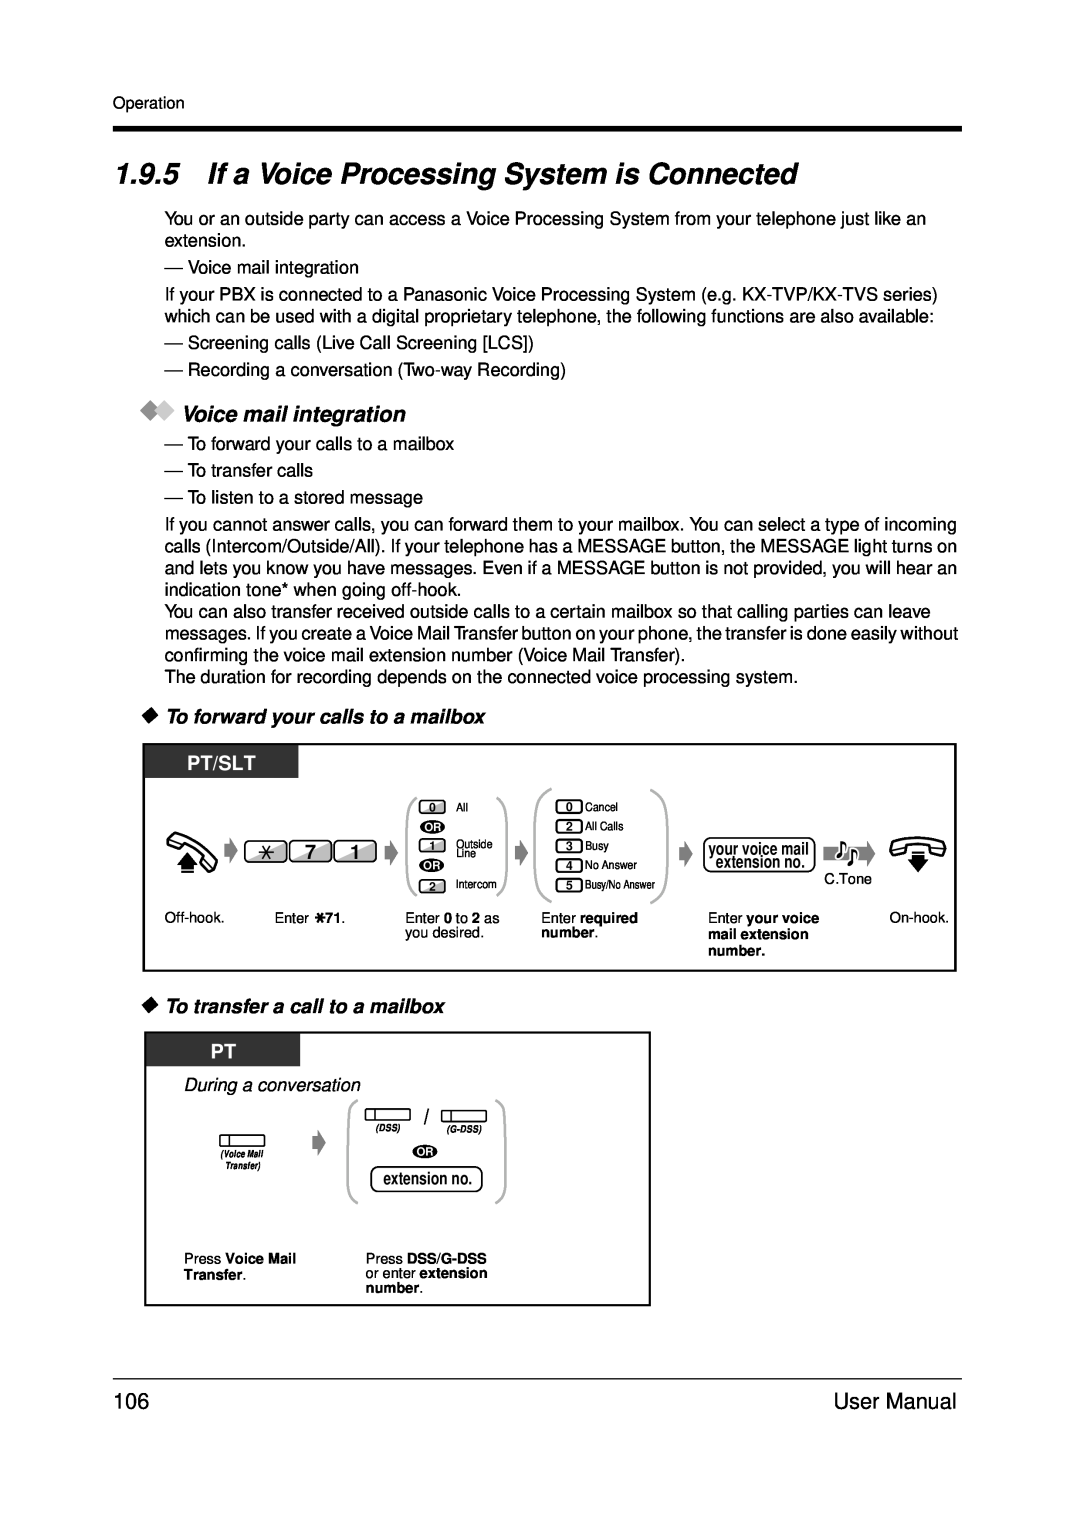 Panasonic KX-TDA200 1.9.5If a Voice Processing System is Connected, Voice mail integration, Pt/Slt, During a conversation 